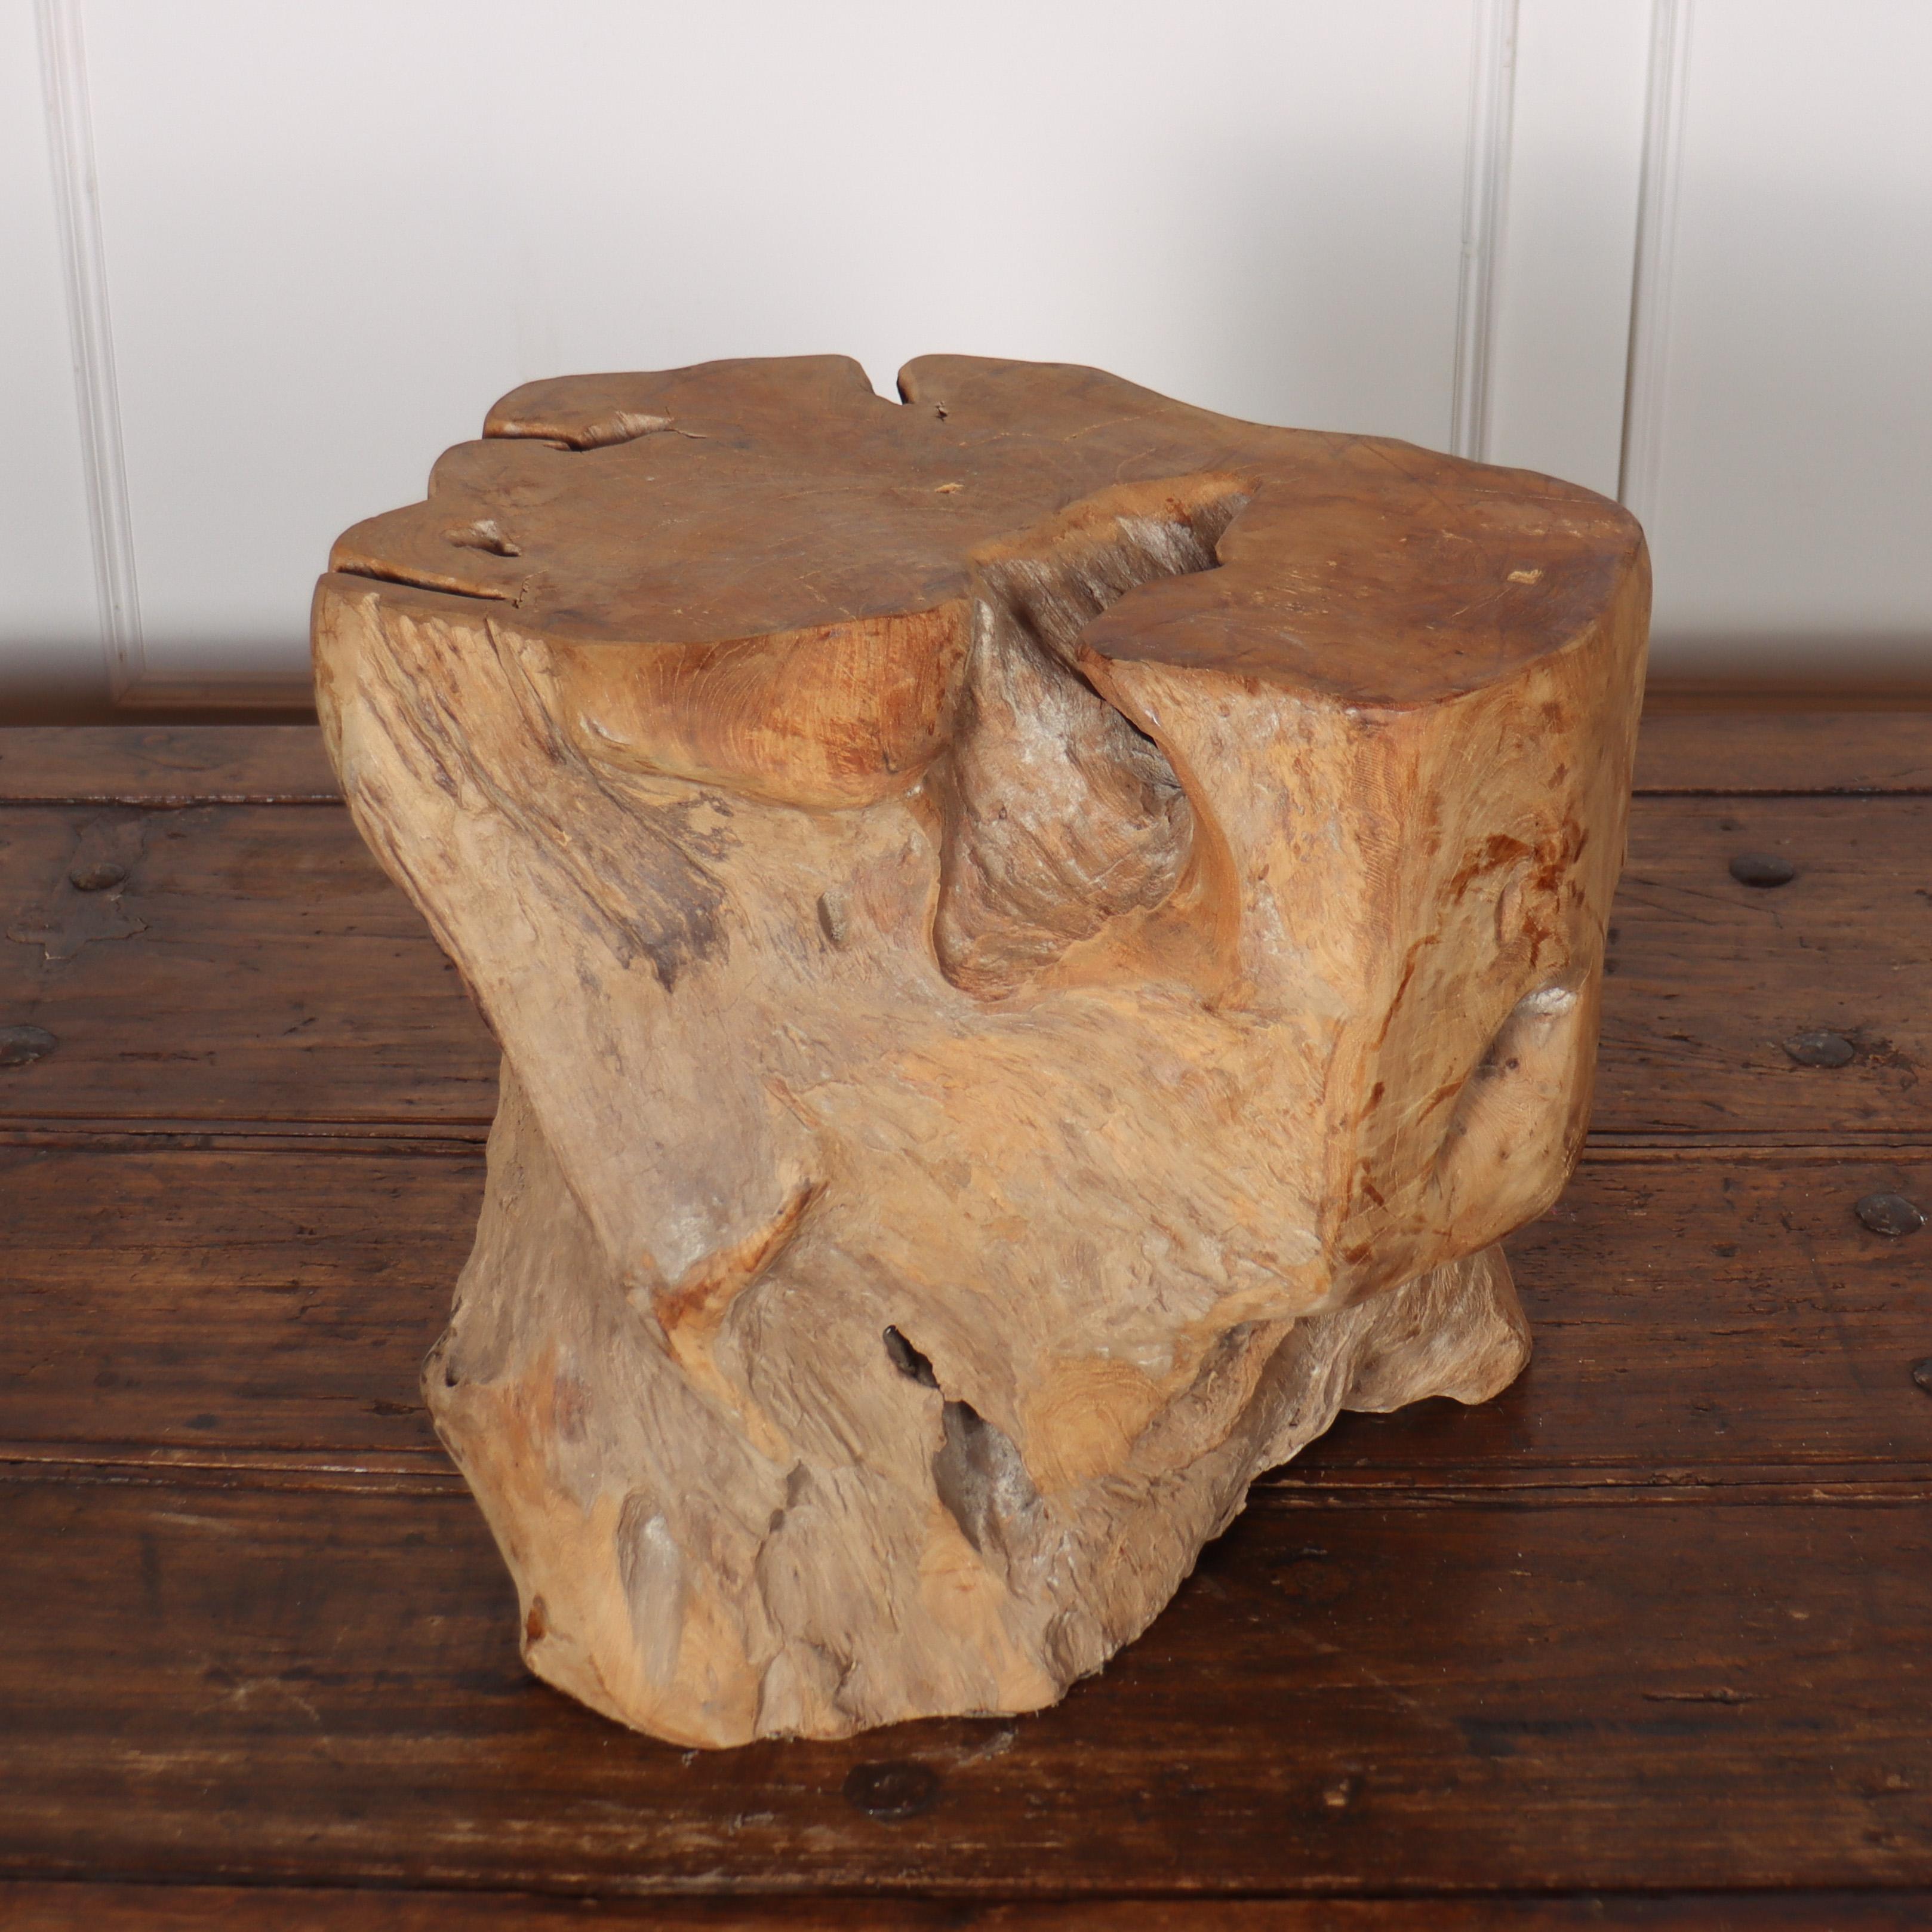 Sculptural rustic root side table.

Ref: A.

Reference: 8144

Dimensions
20 inches (51 cms) Wide
20 inches (51 cms) Deep
19 inches (48 cms) High